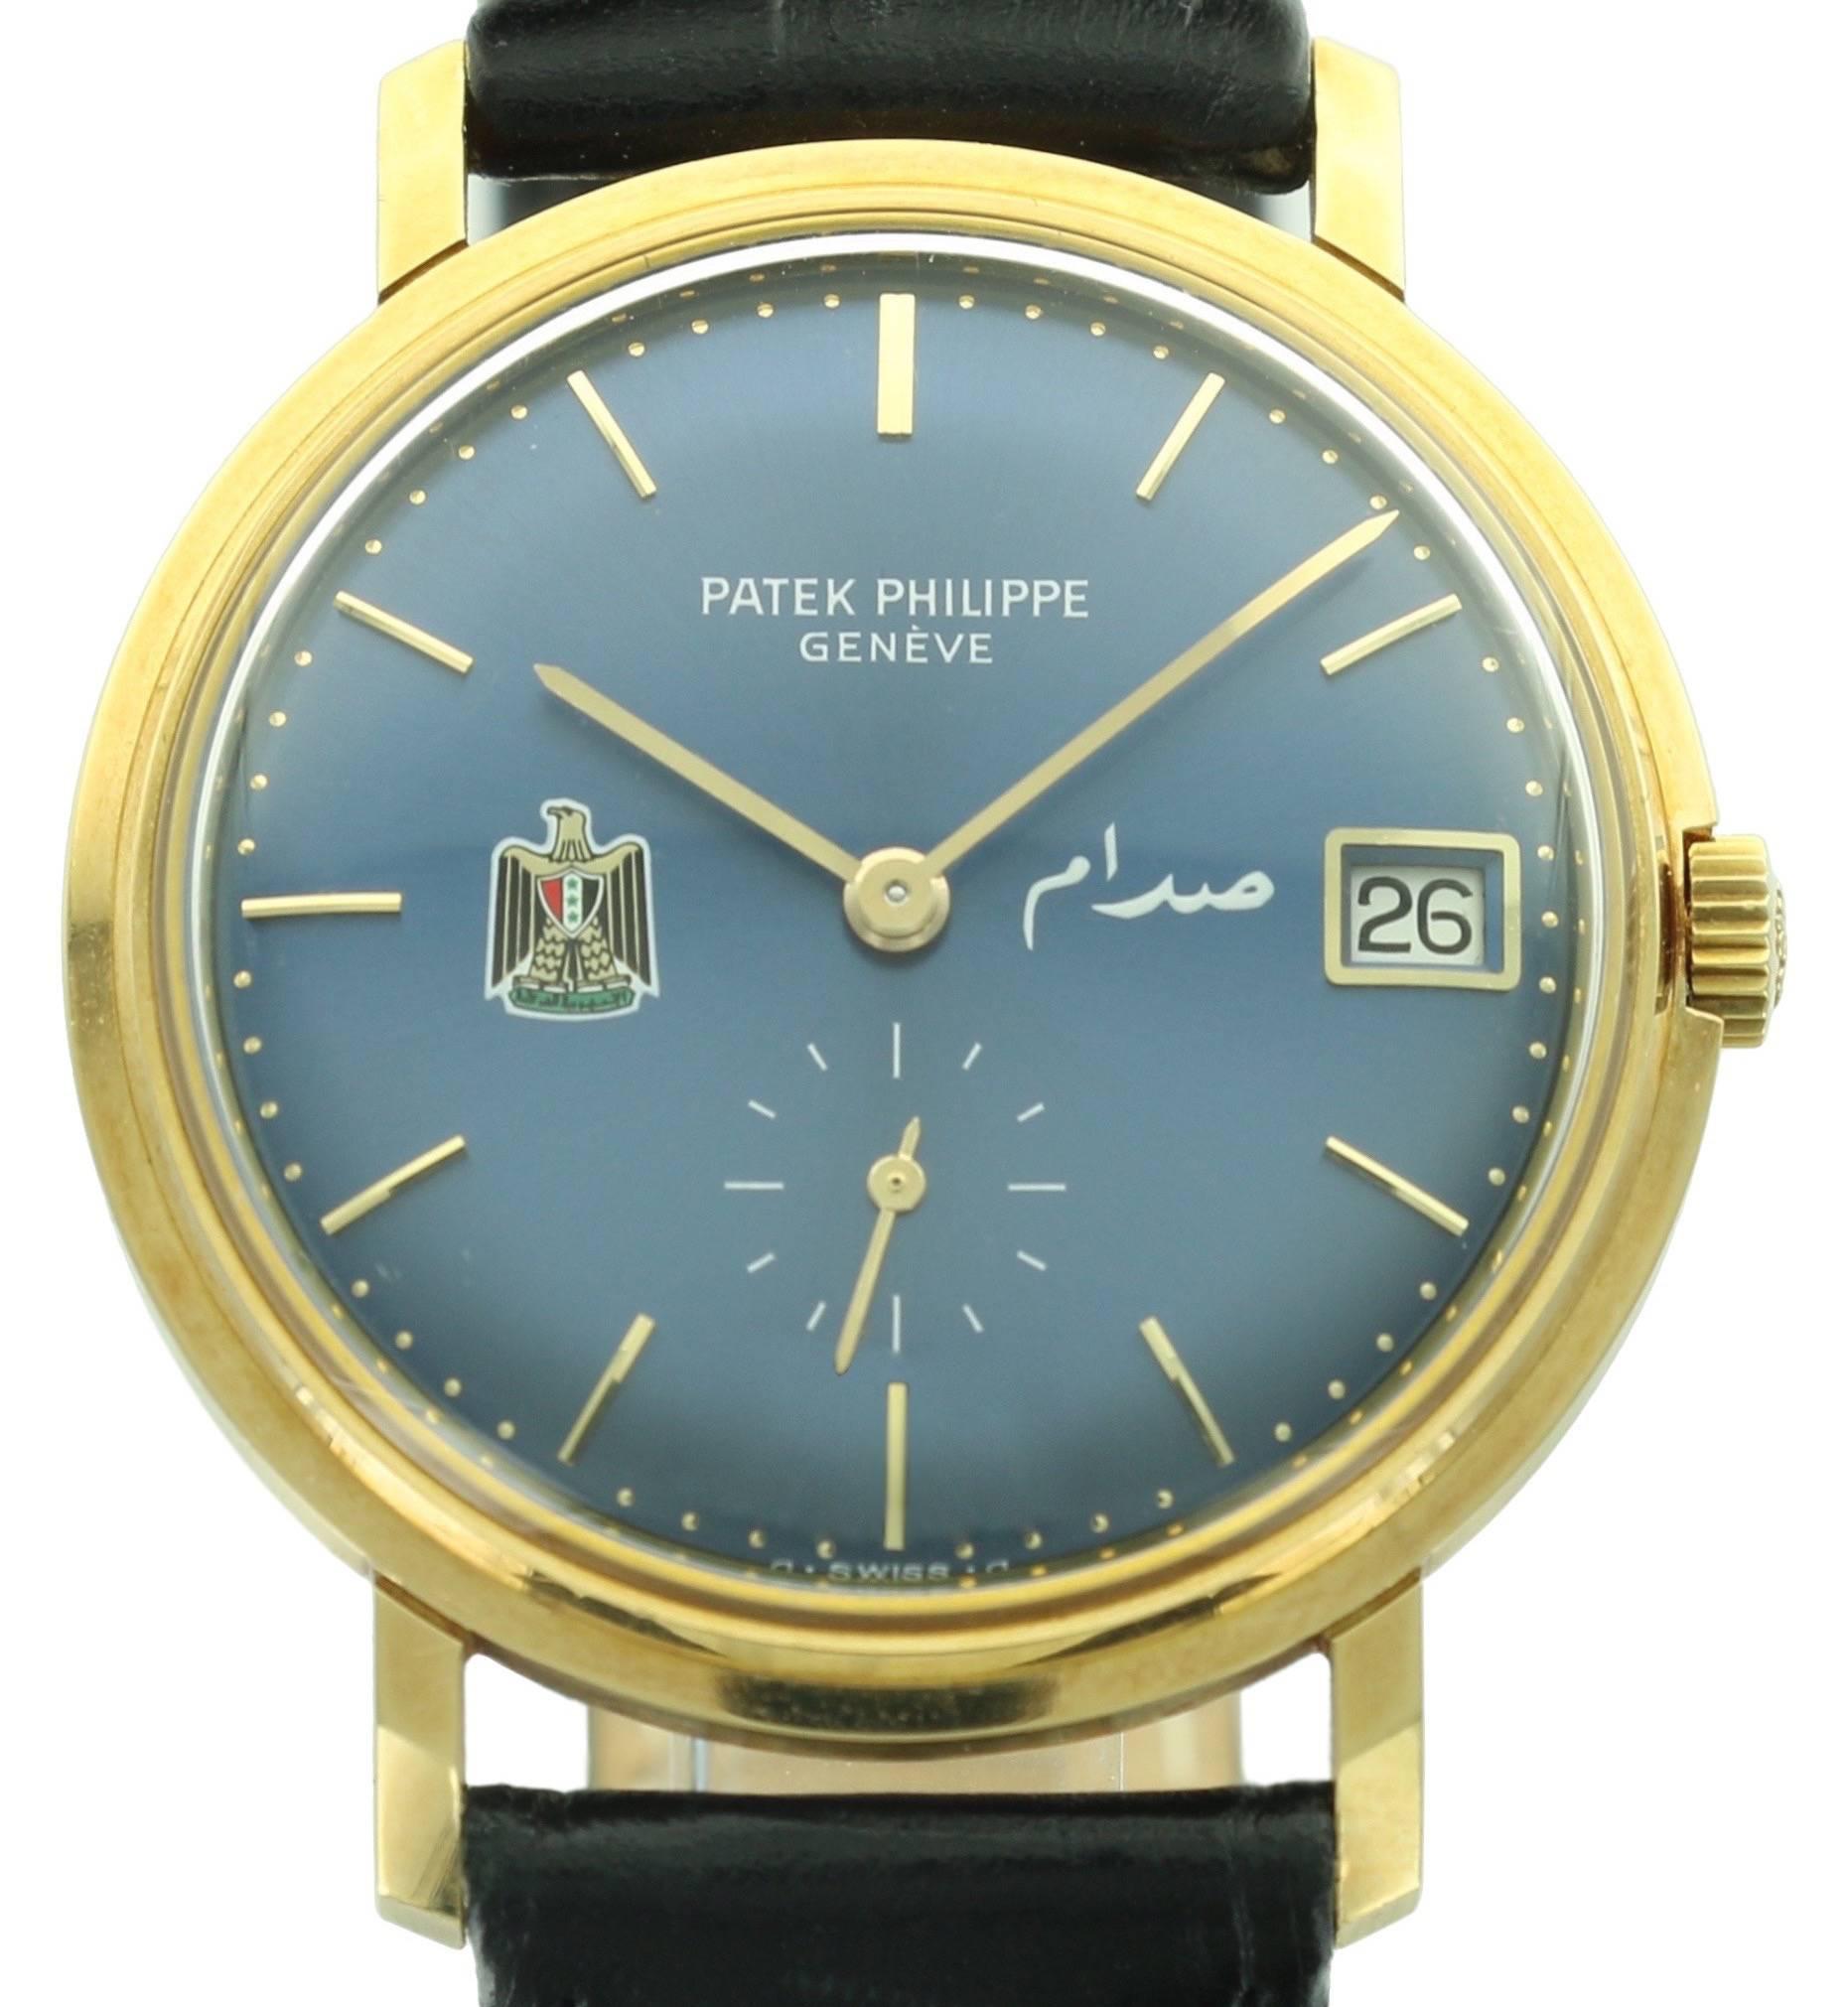 An extremely rare Patek Philippe Calatrava, ref. 3445J with a dial featuring the coat of arms of Iraq. The deep blue dial and yellow gold case make for a beautiful, rich color combo. 